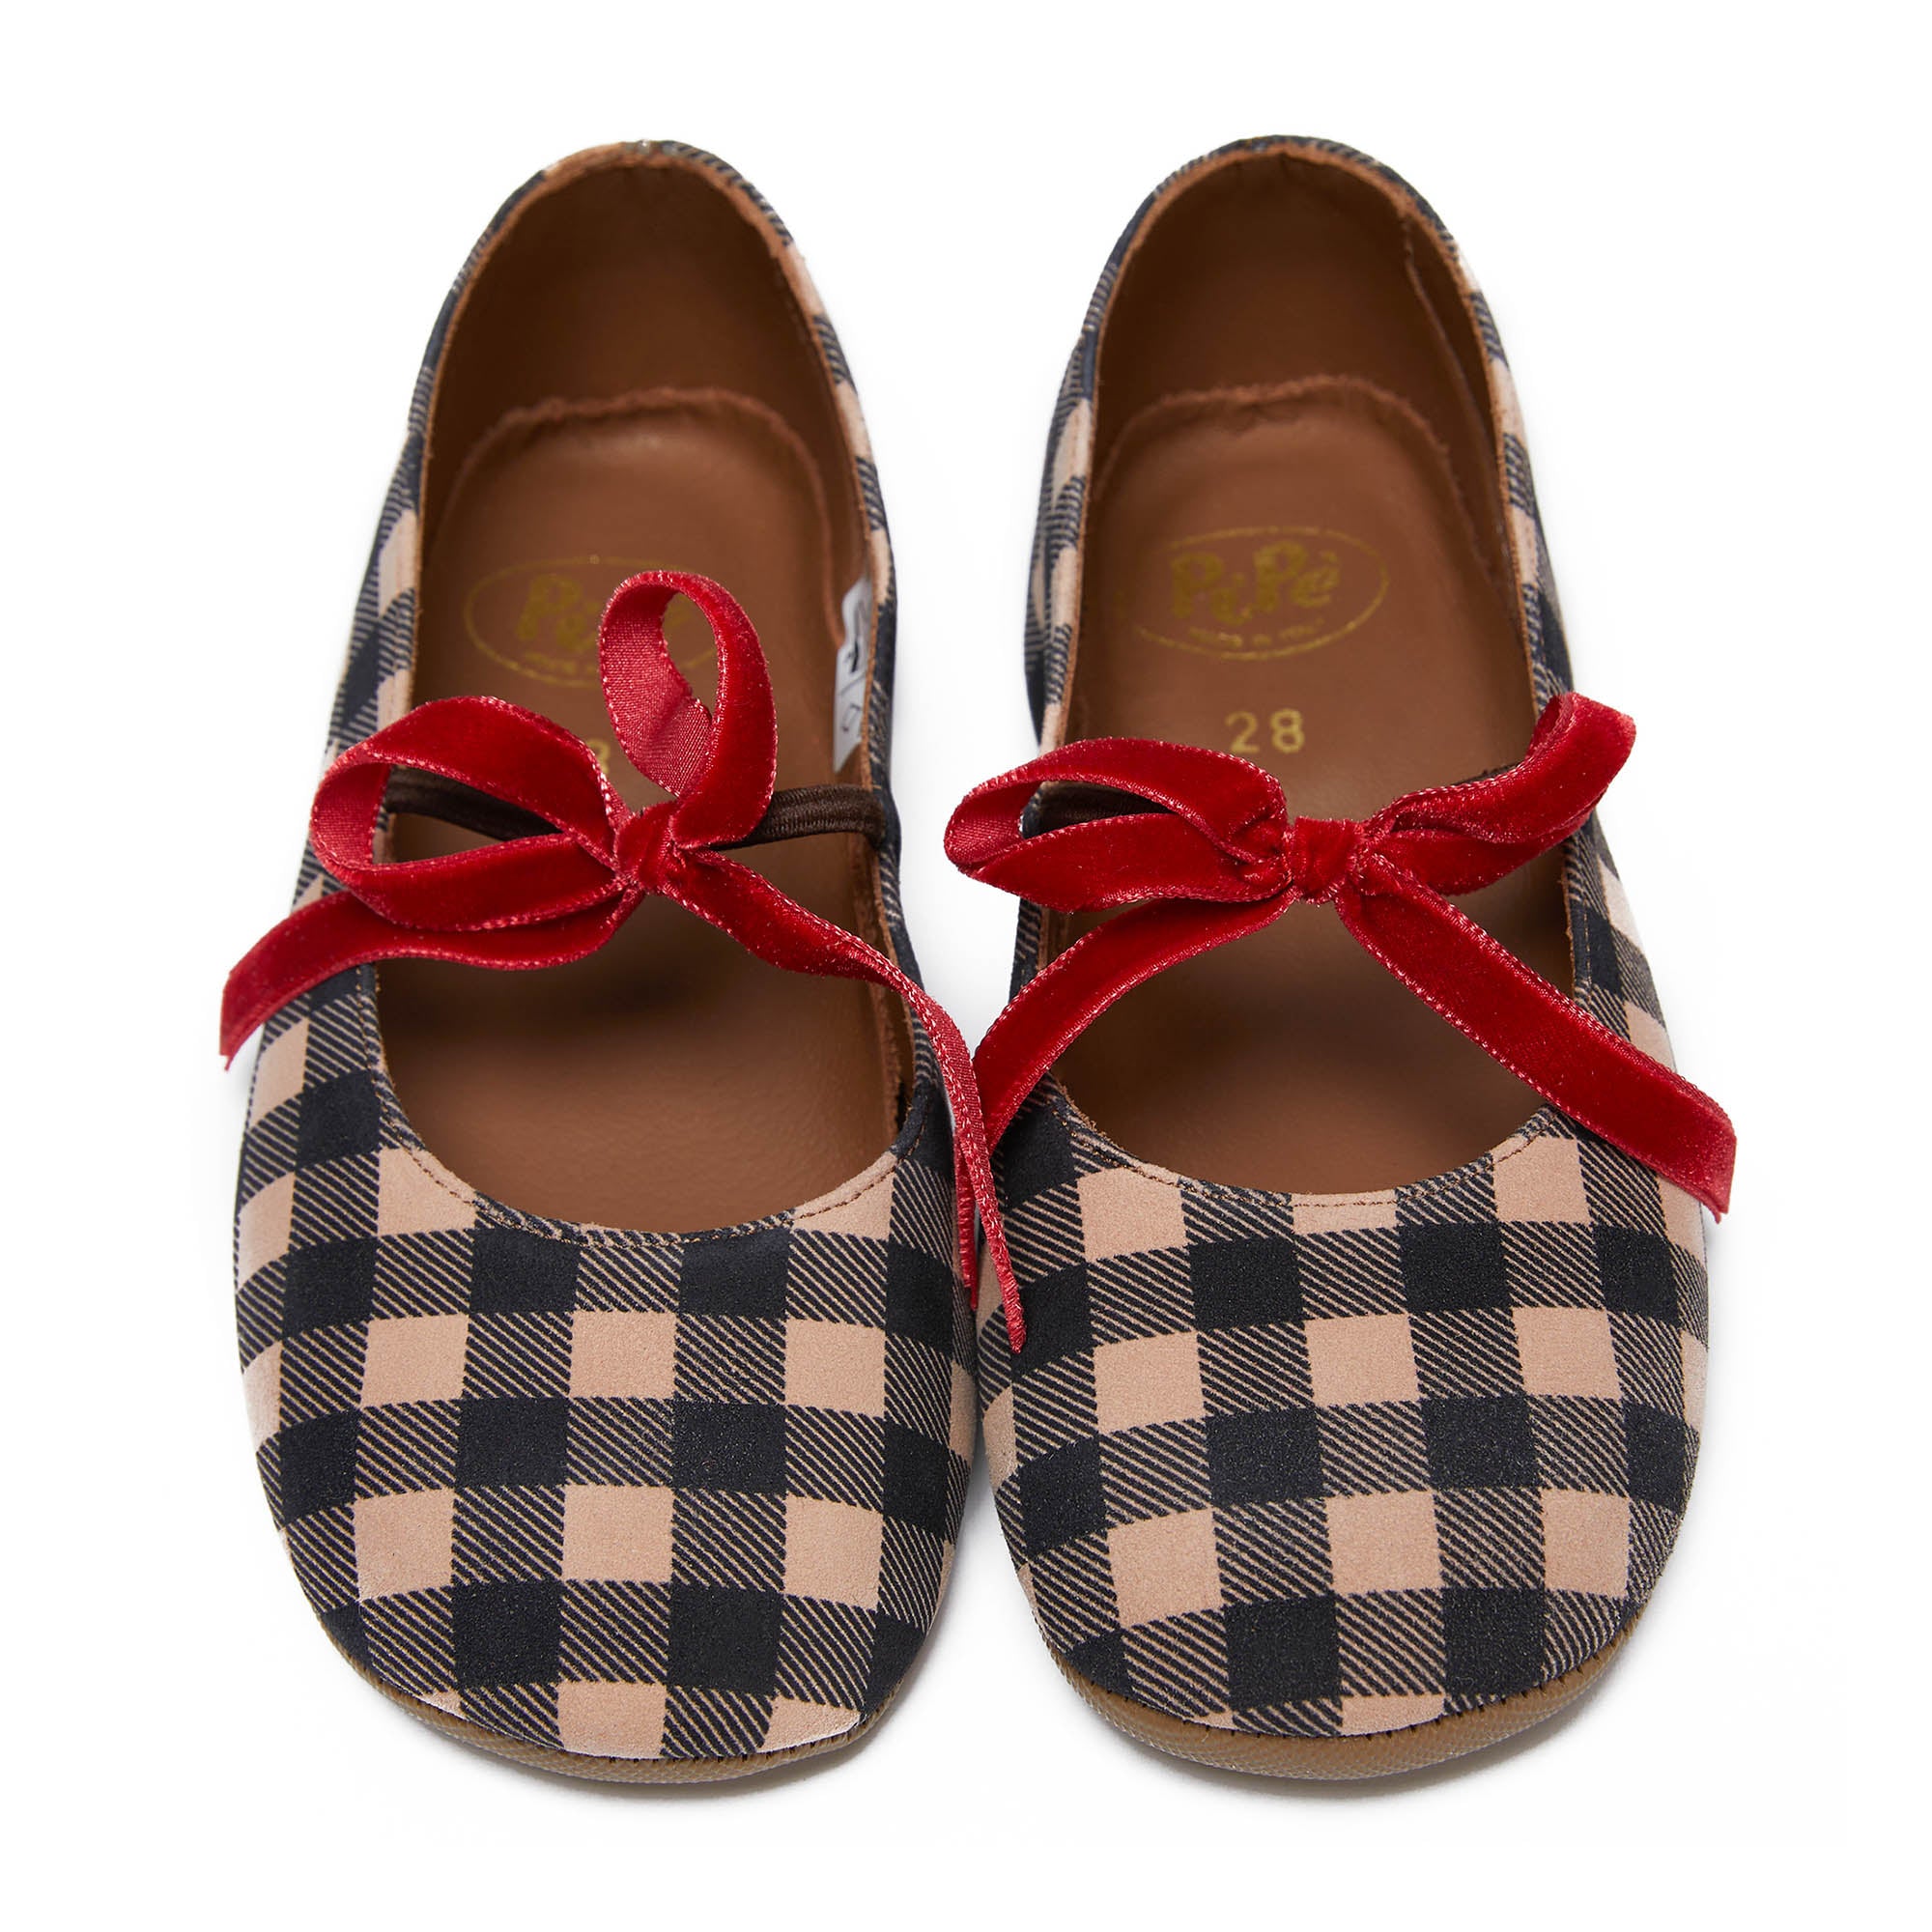 Girls Brown Check Flat Shoes